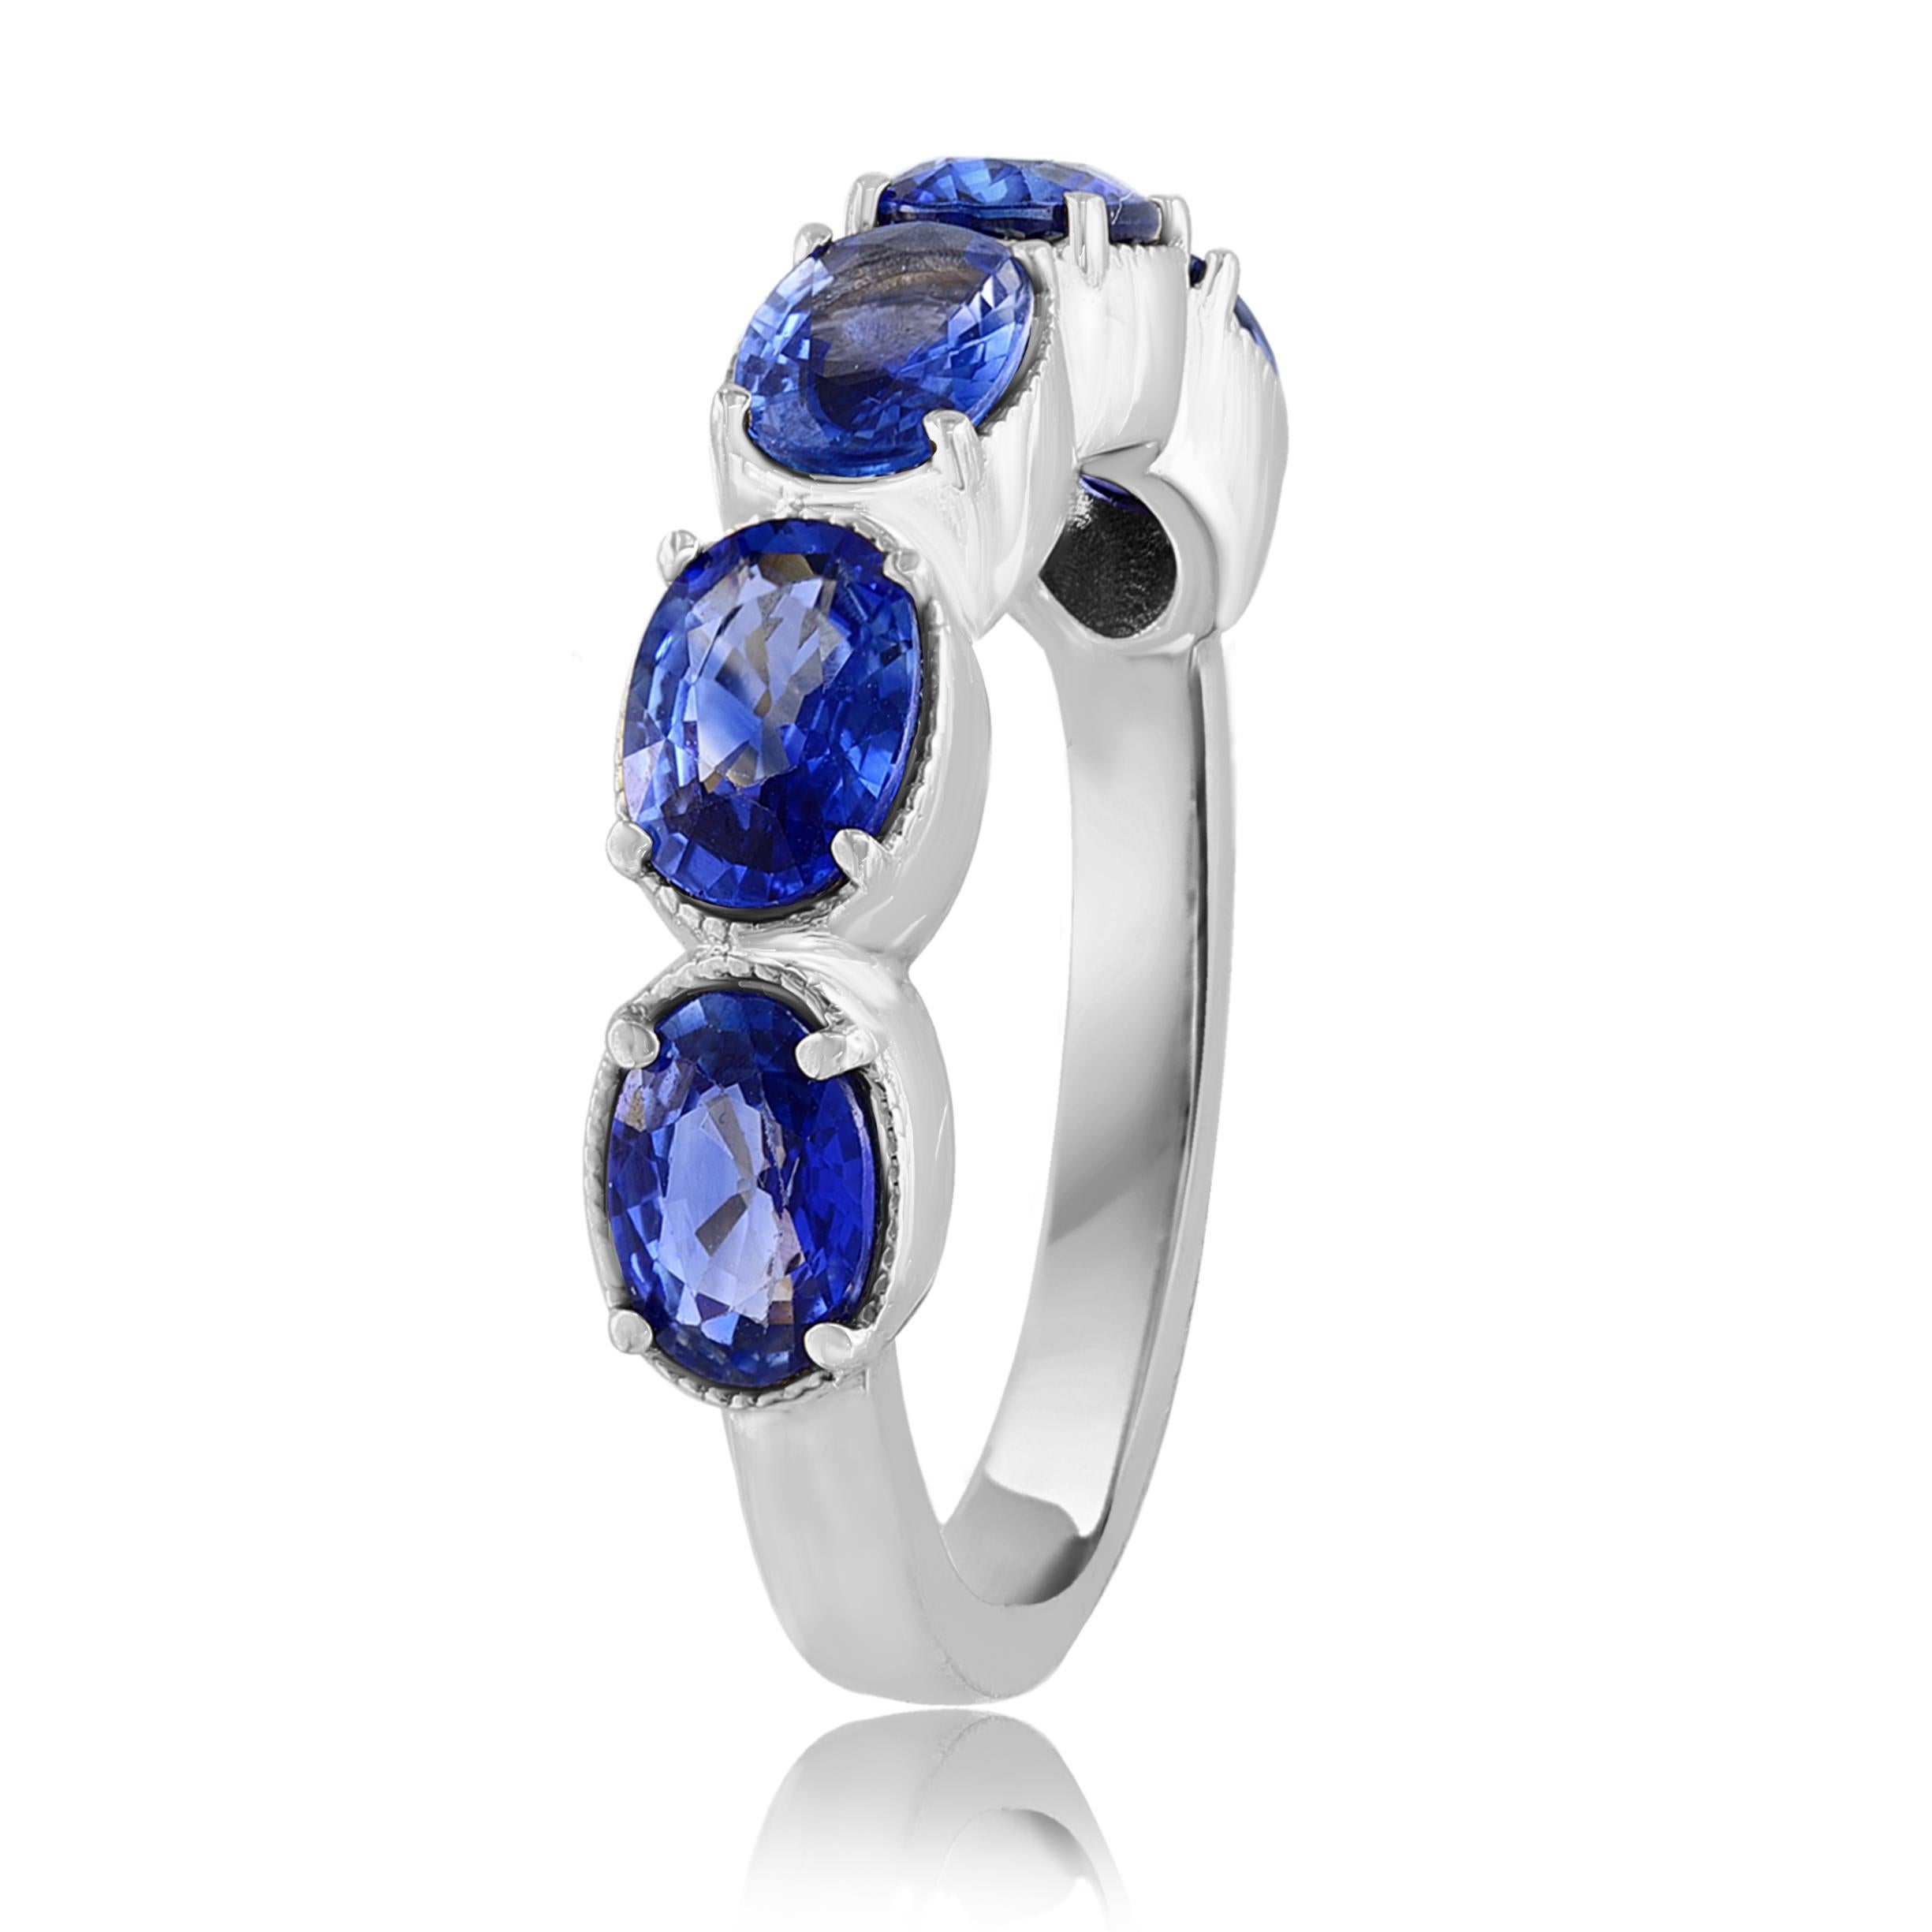 Contemporary 2.76 Carat Blue Sapphire and Diamond 5 Stone Wedding Band in 14k White Gold For Sale